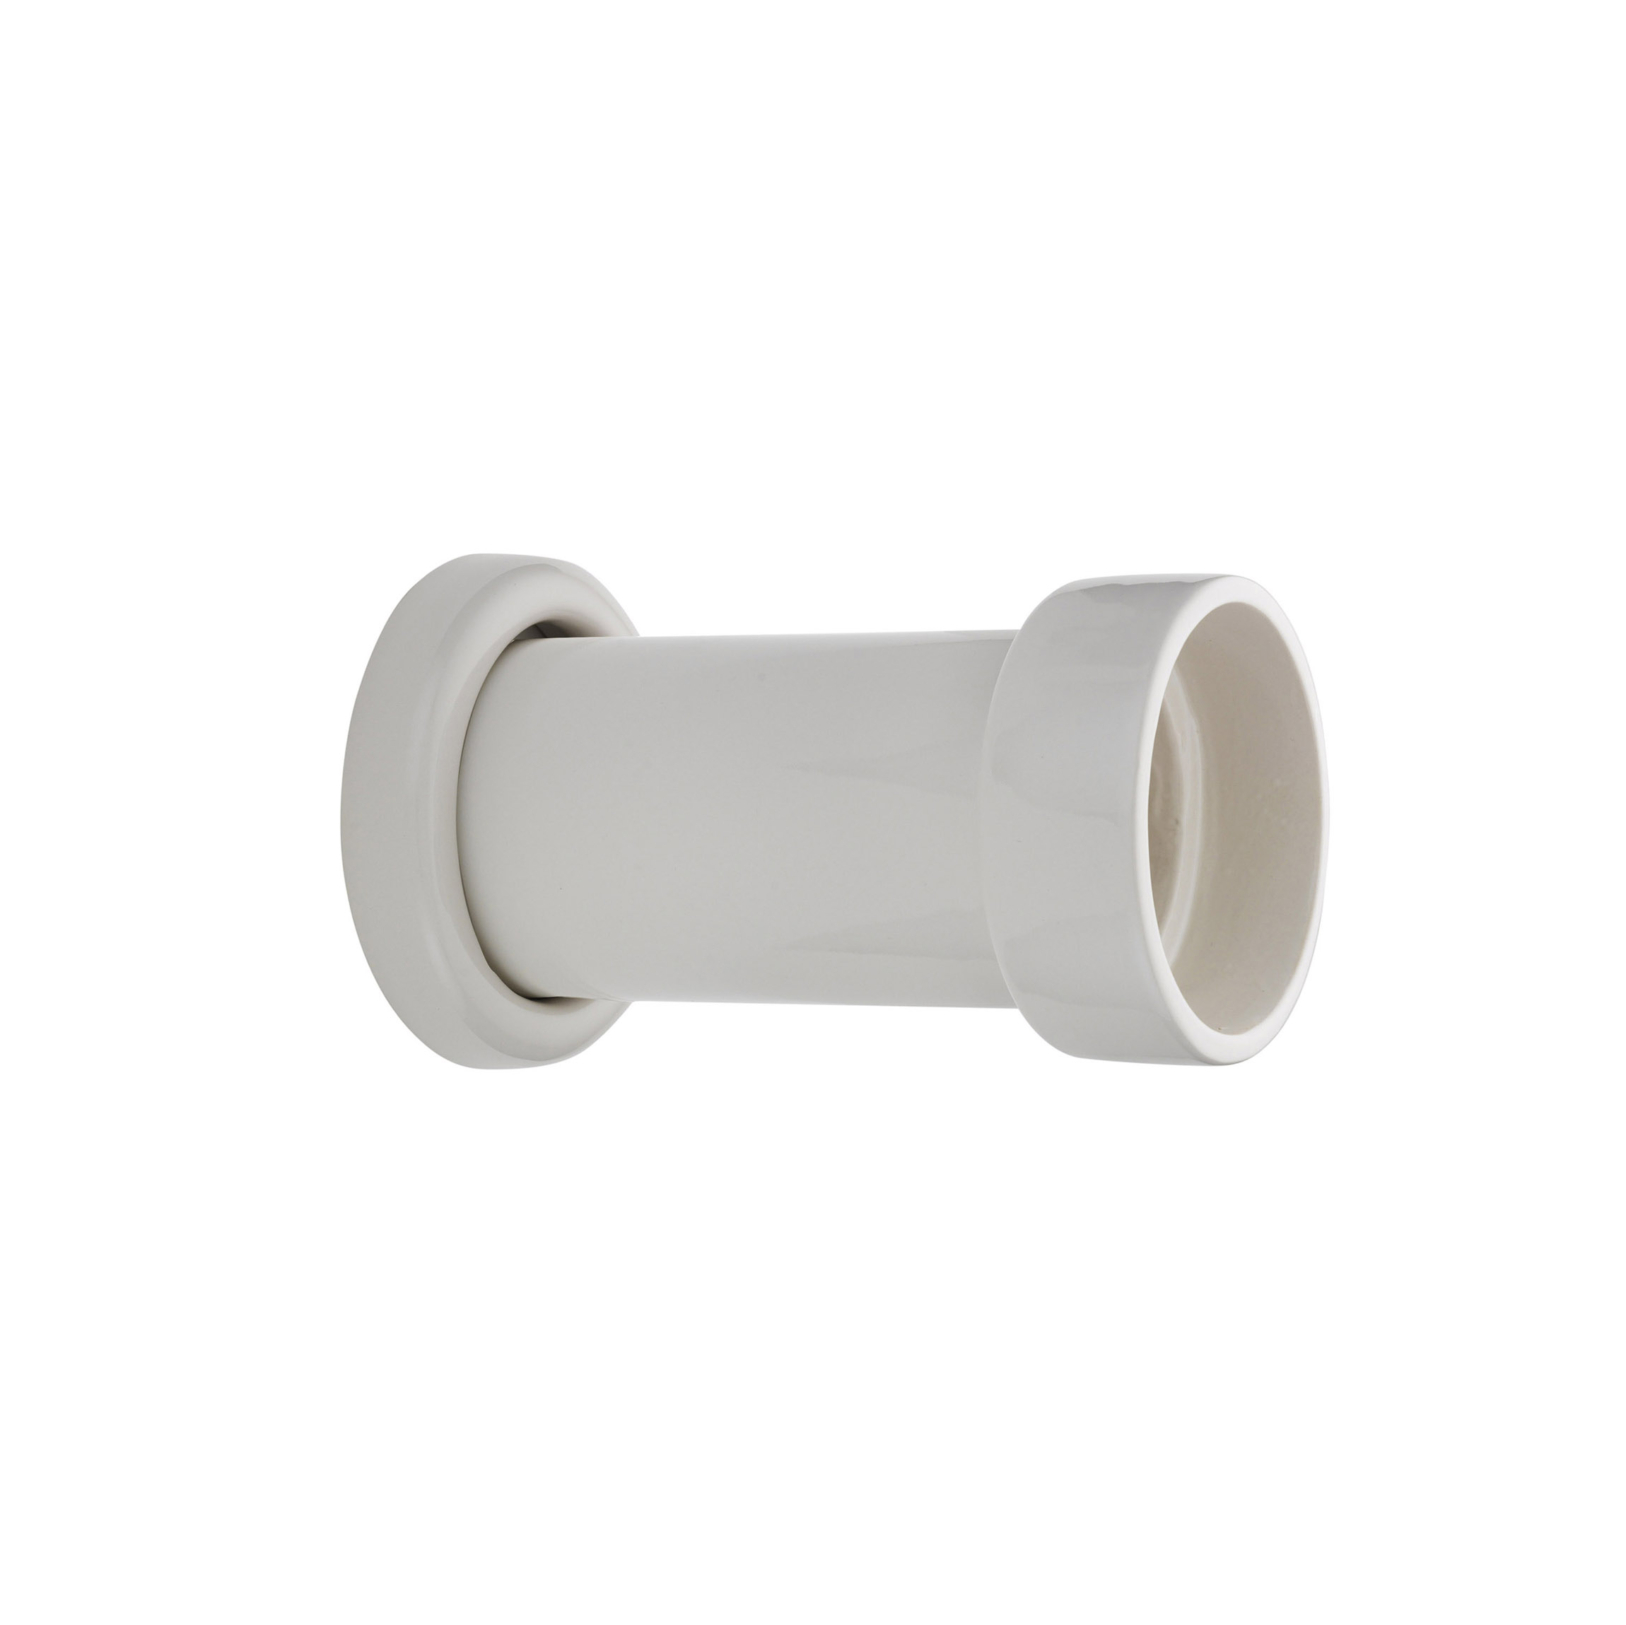 Ceramic Soil Pipe Connector Into Wall